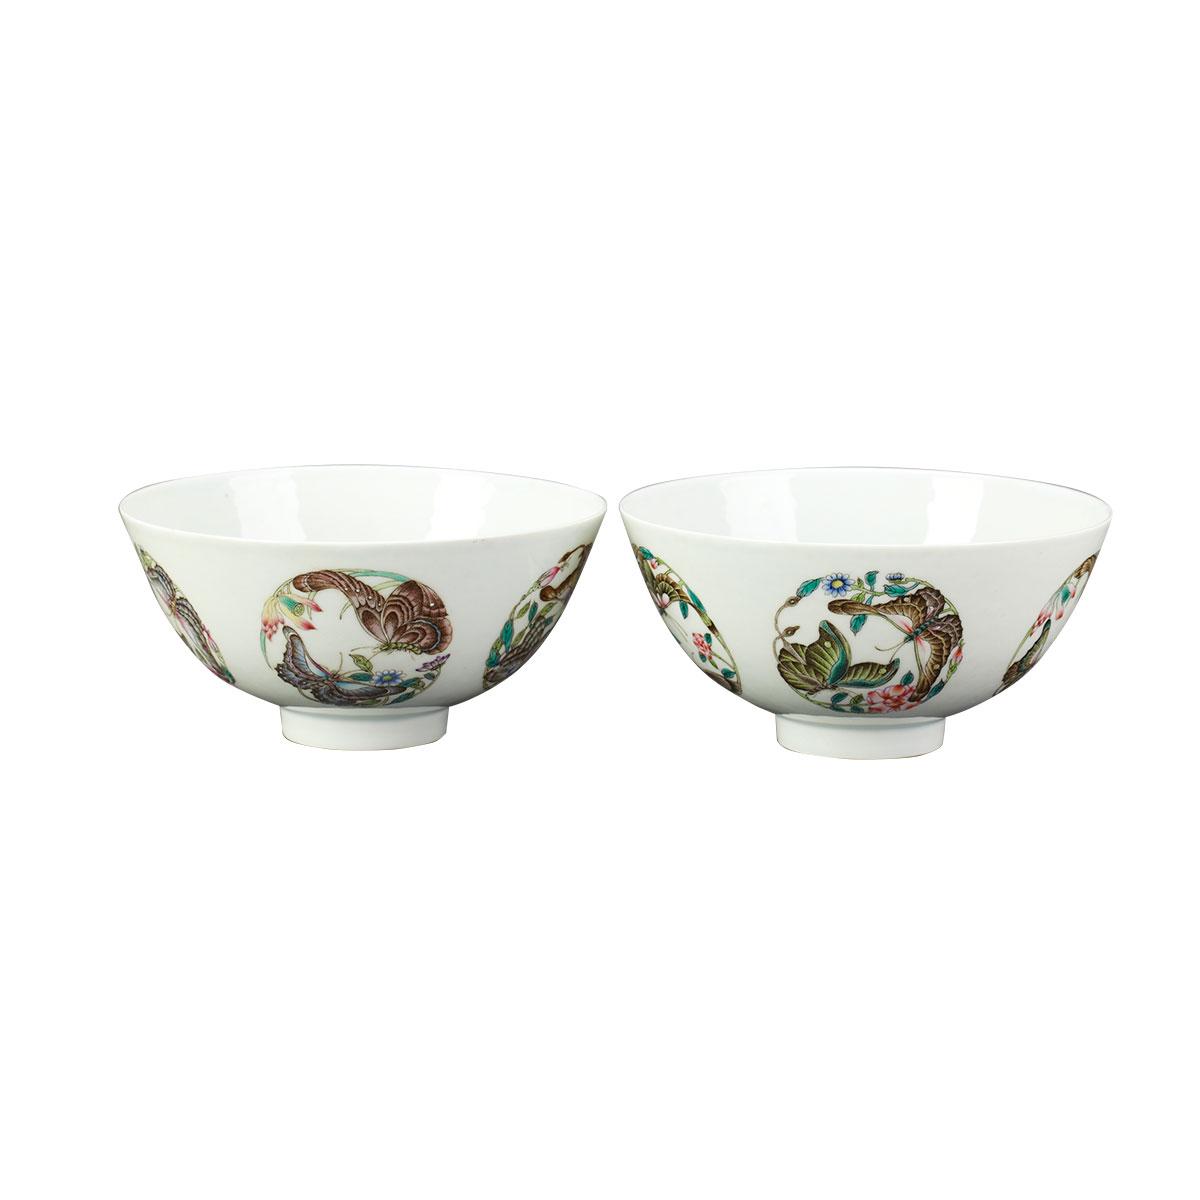 Pair of Famille Rose Butterfly Bowl, Yongzheng Mark, Republican Period 